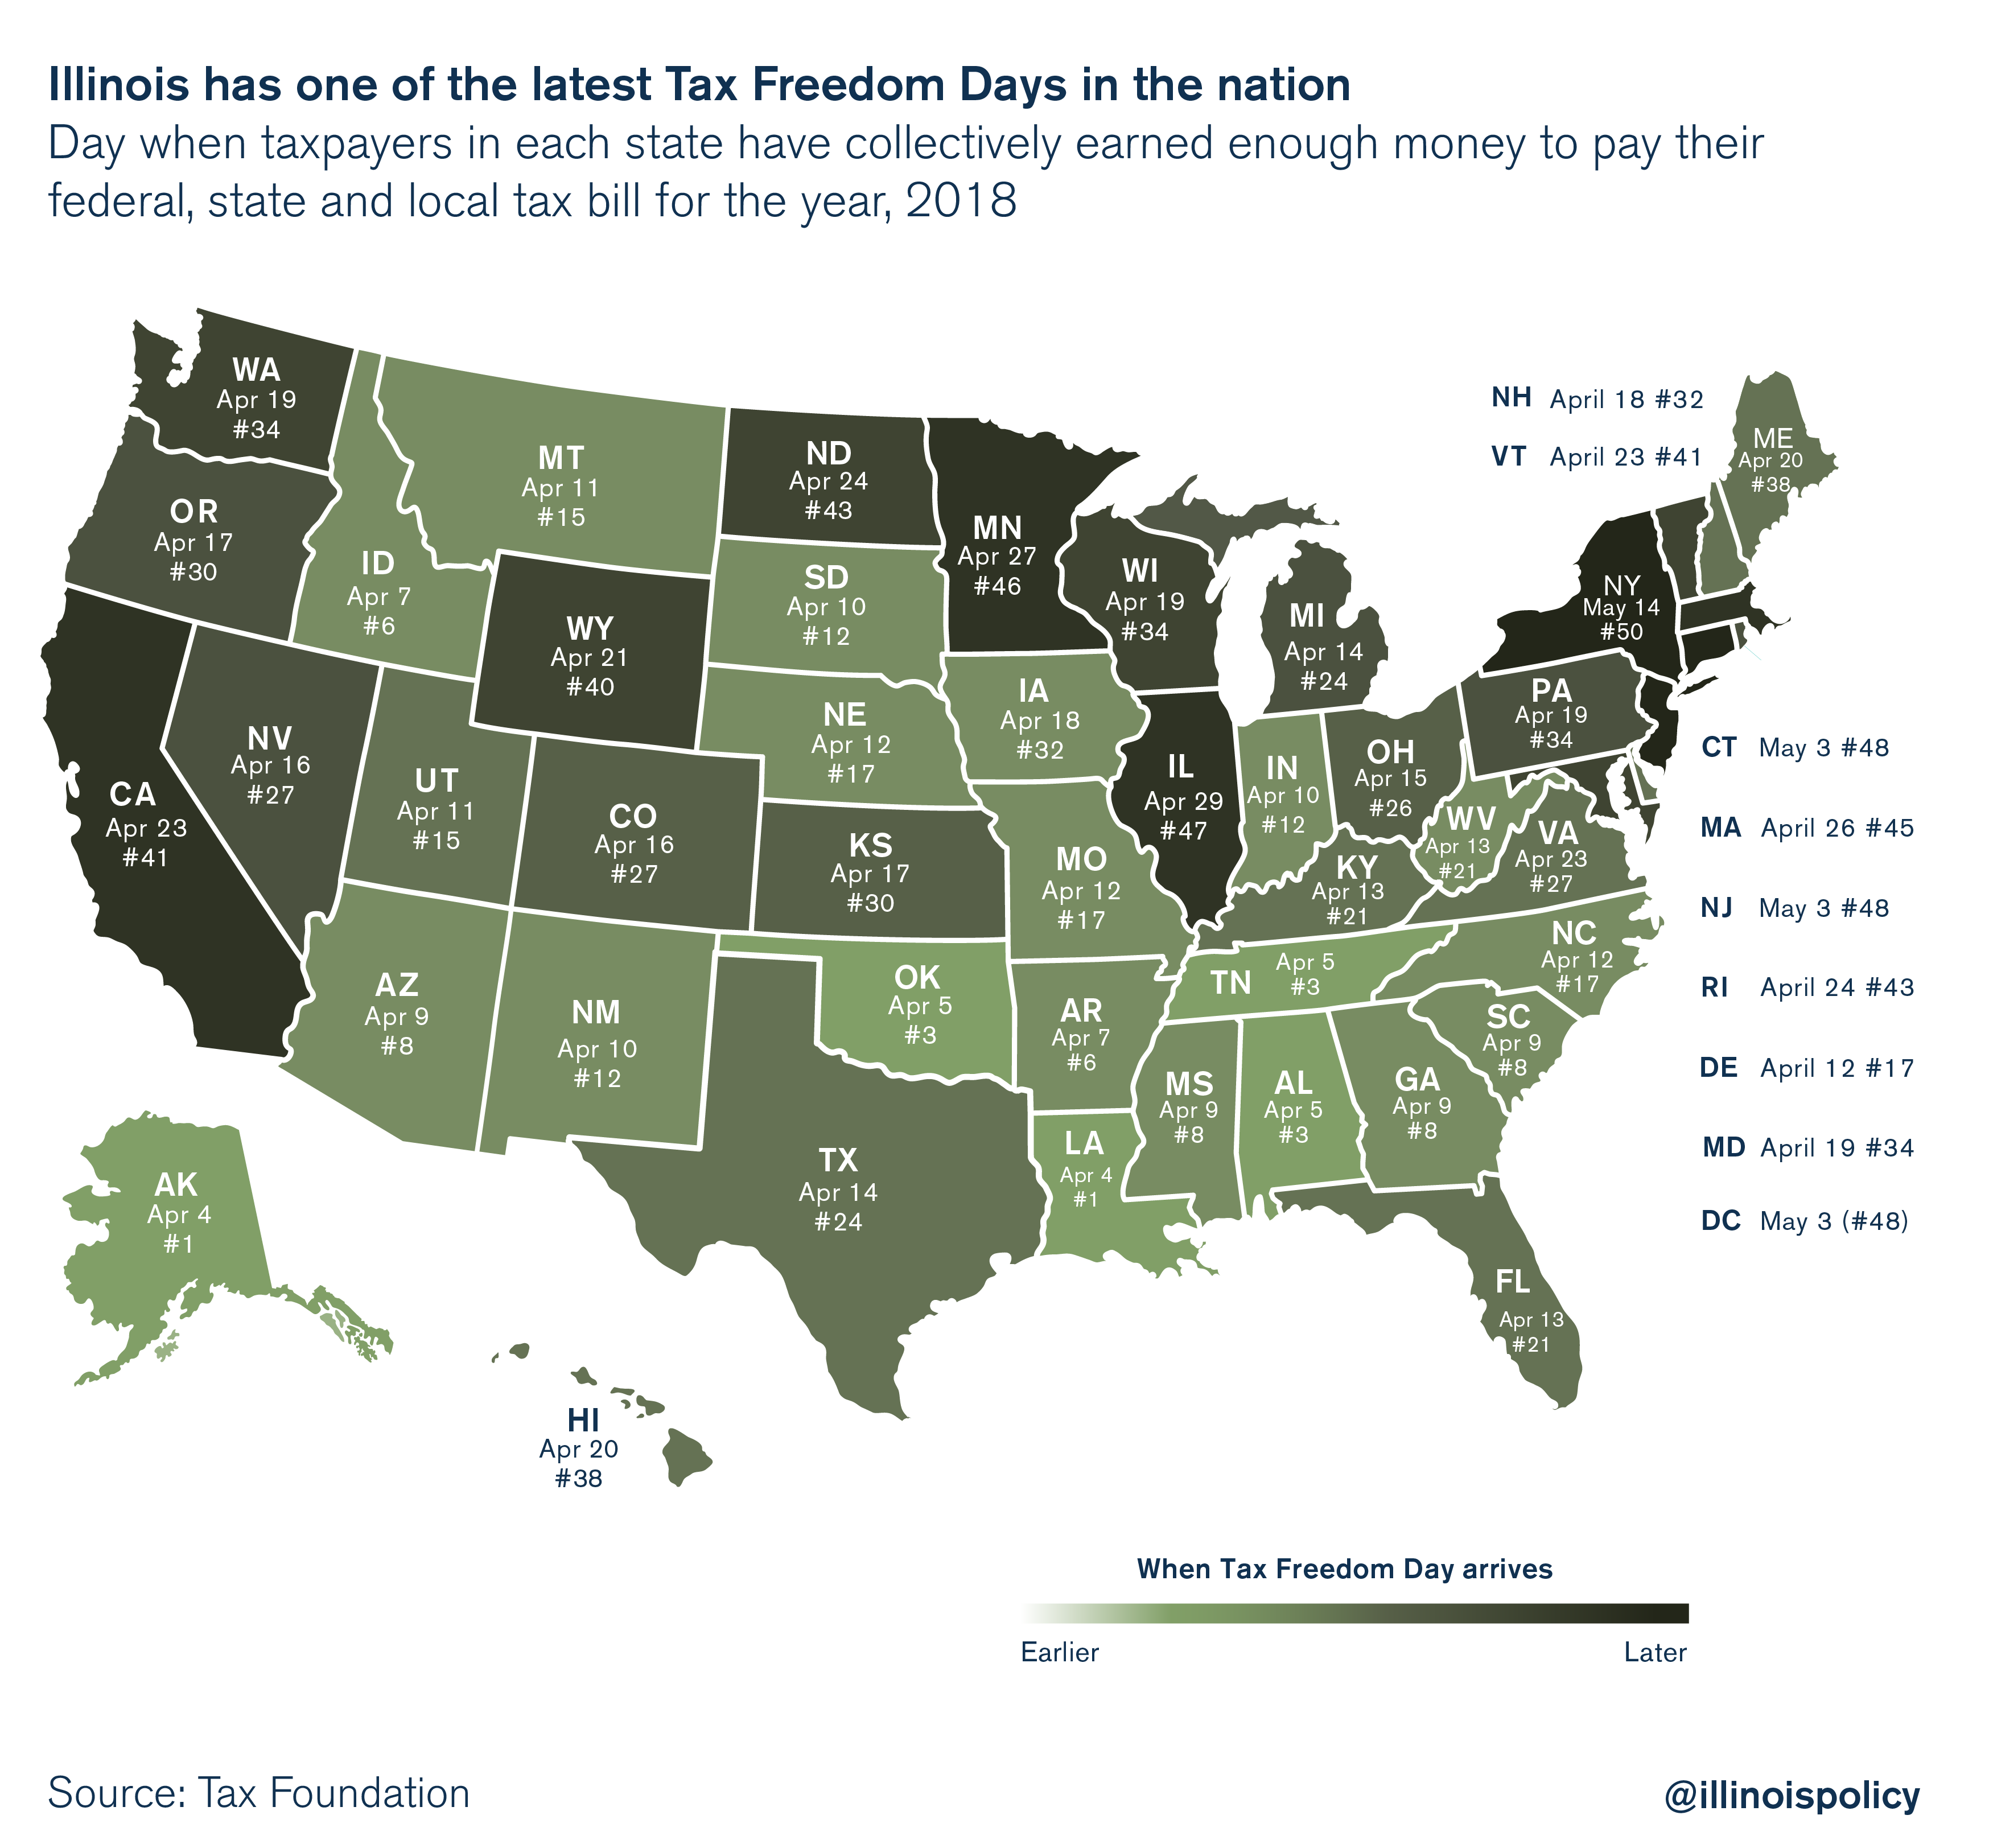 Illinois’ Tax Freedom Day doesn’t come for another 2 weeks